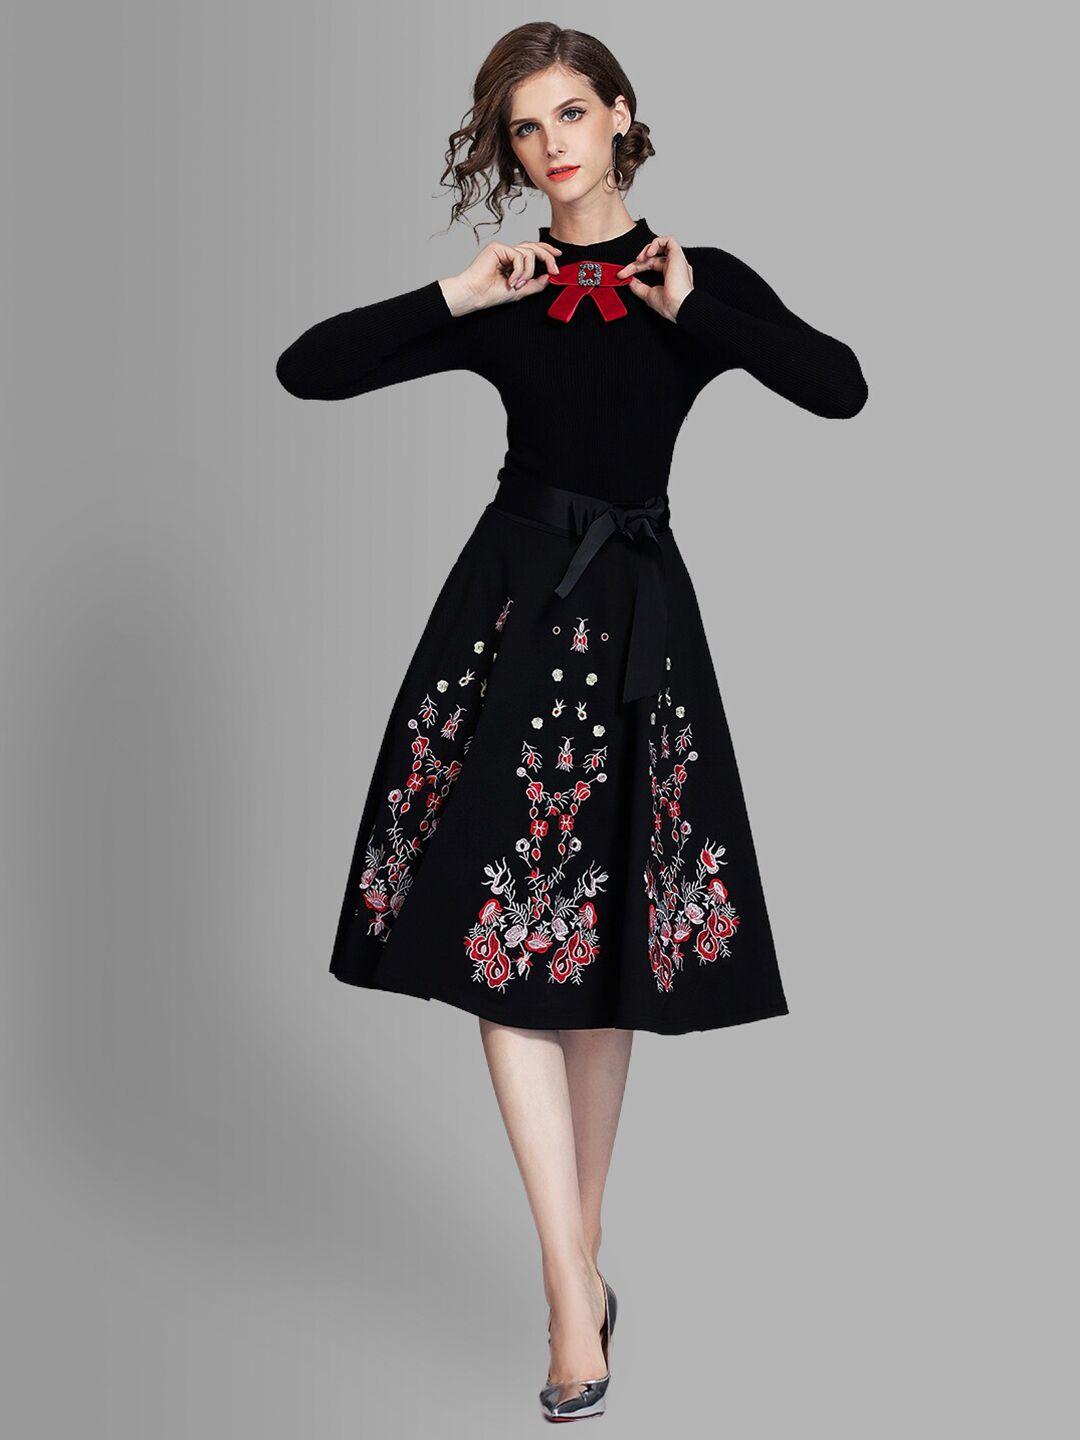 jc-collection-women-black-&-red-floral-embroidered-tie-up-neck-dress